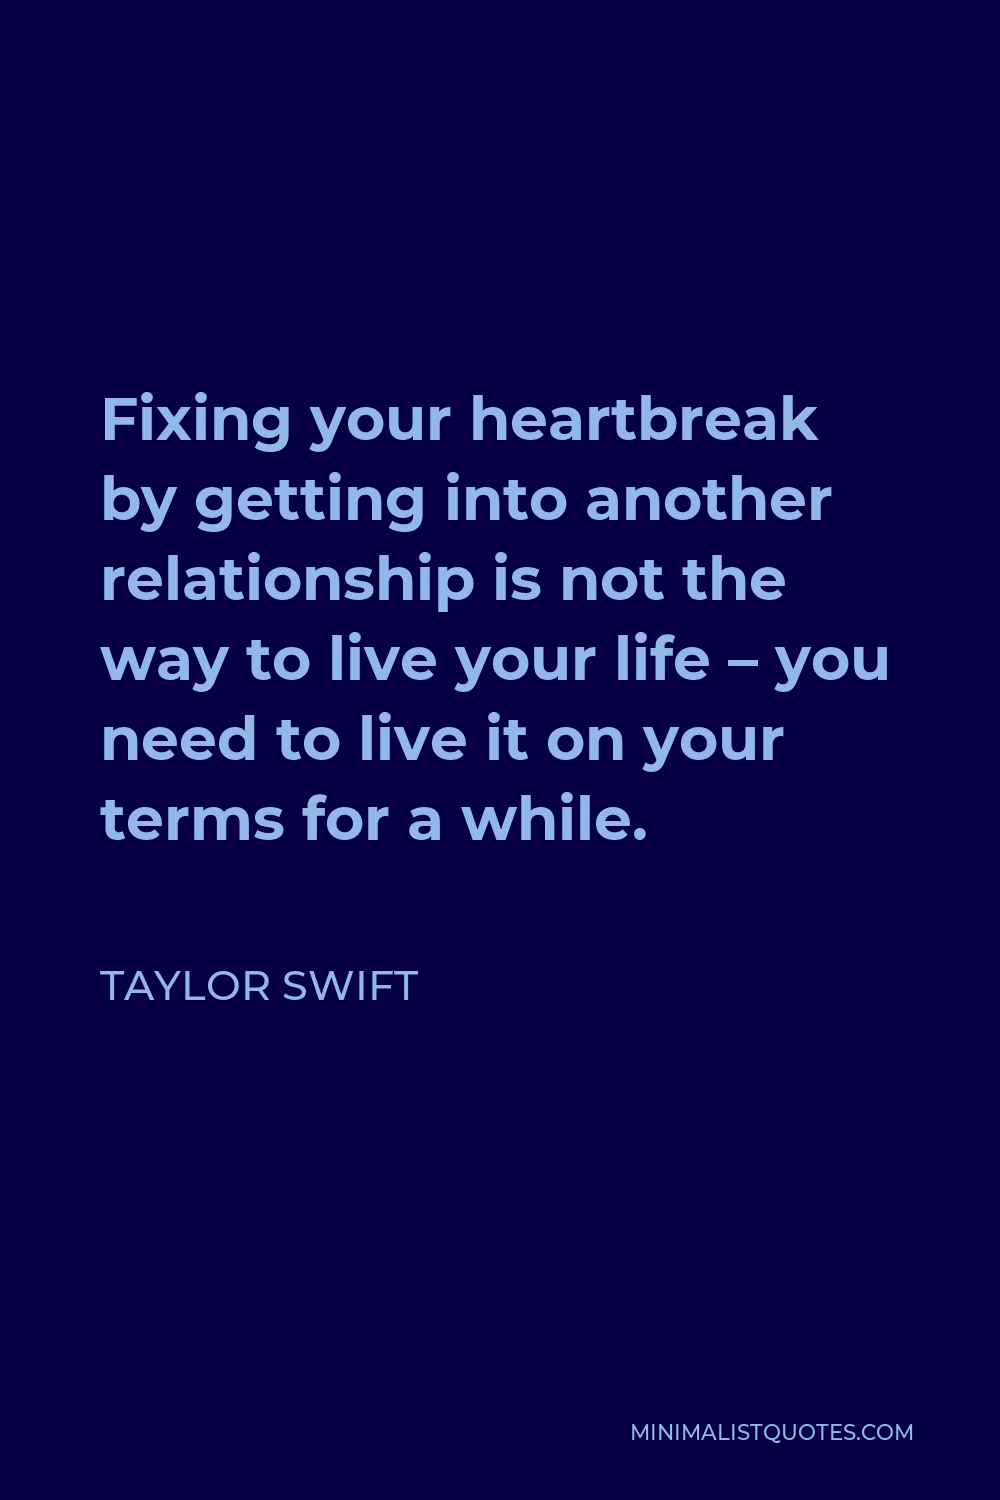 Taylor Swift Quote - Fixing your heartbreak by getting into another relationship is not the way to live your life – you need to live it on your terms for a while.